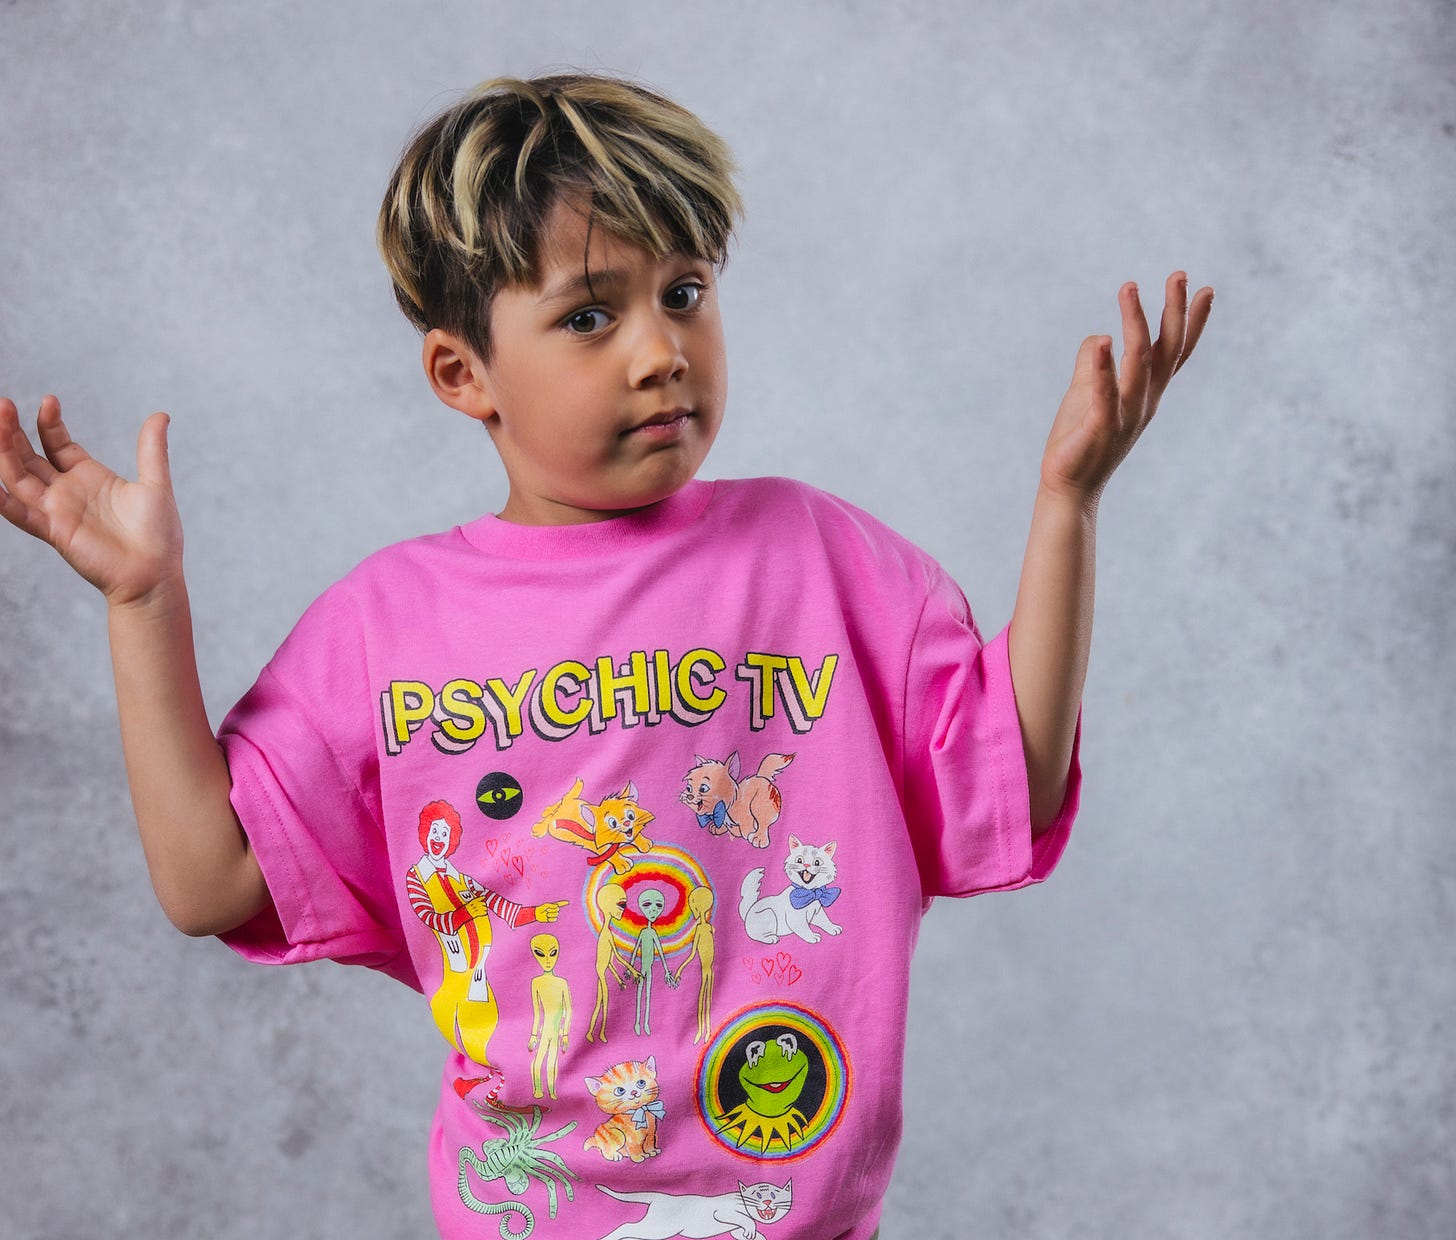 Pink shirt with the words "Psychic TV" at the top and illustrations of Kermit and cats and Ronald McDonald with upside down M's